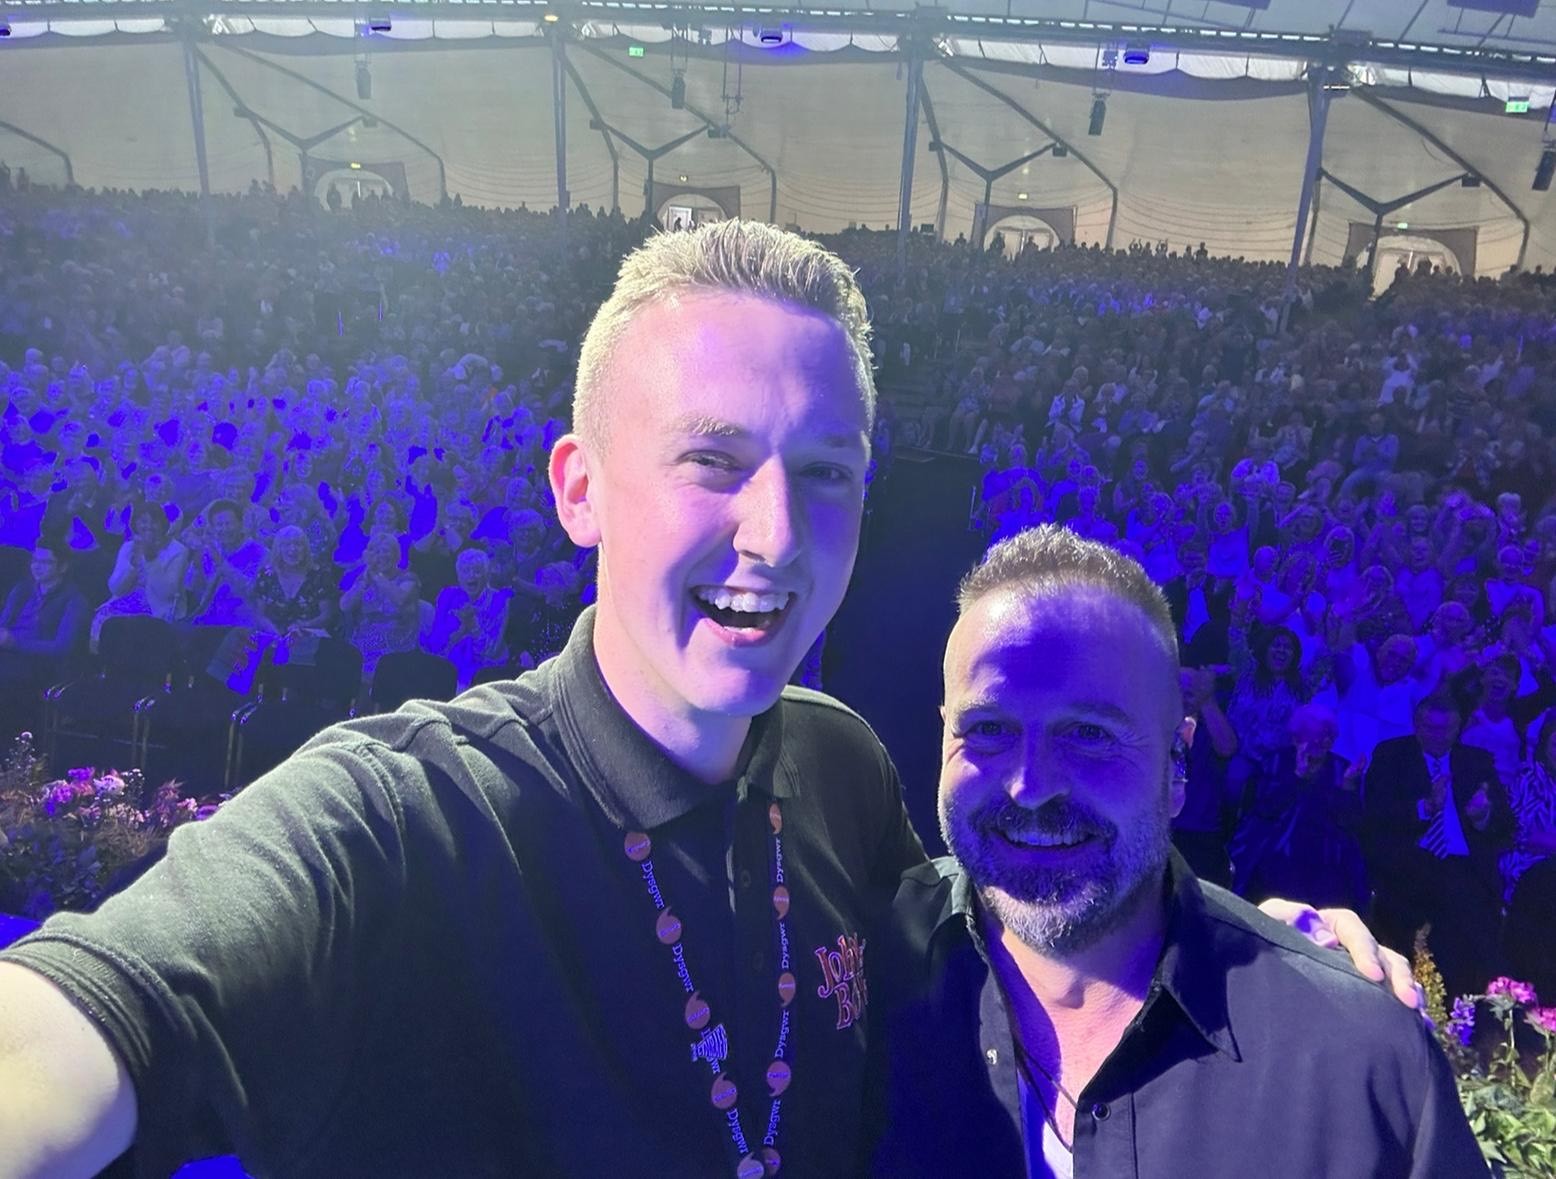 New trustee Shea Ferron on stage at Llangollen2023 with Alfie Boe, taking a selfie showing the audience in the background.